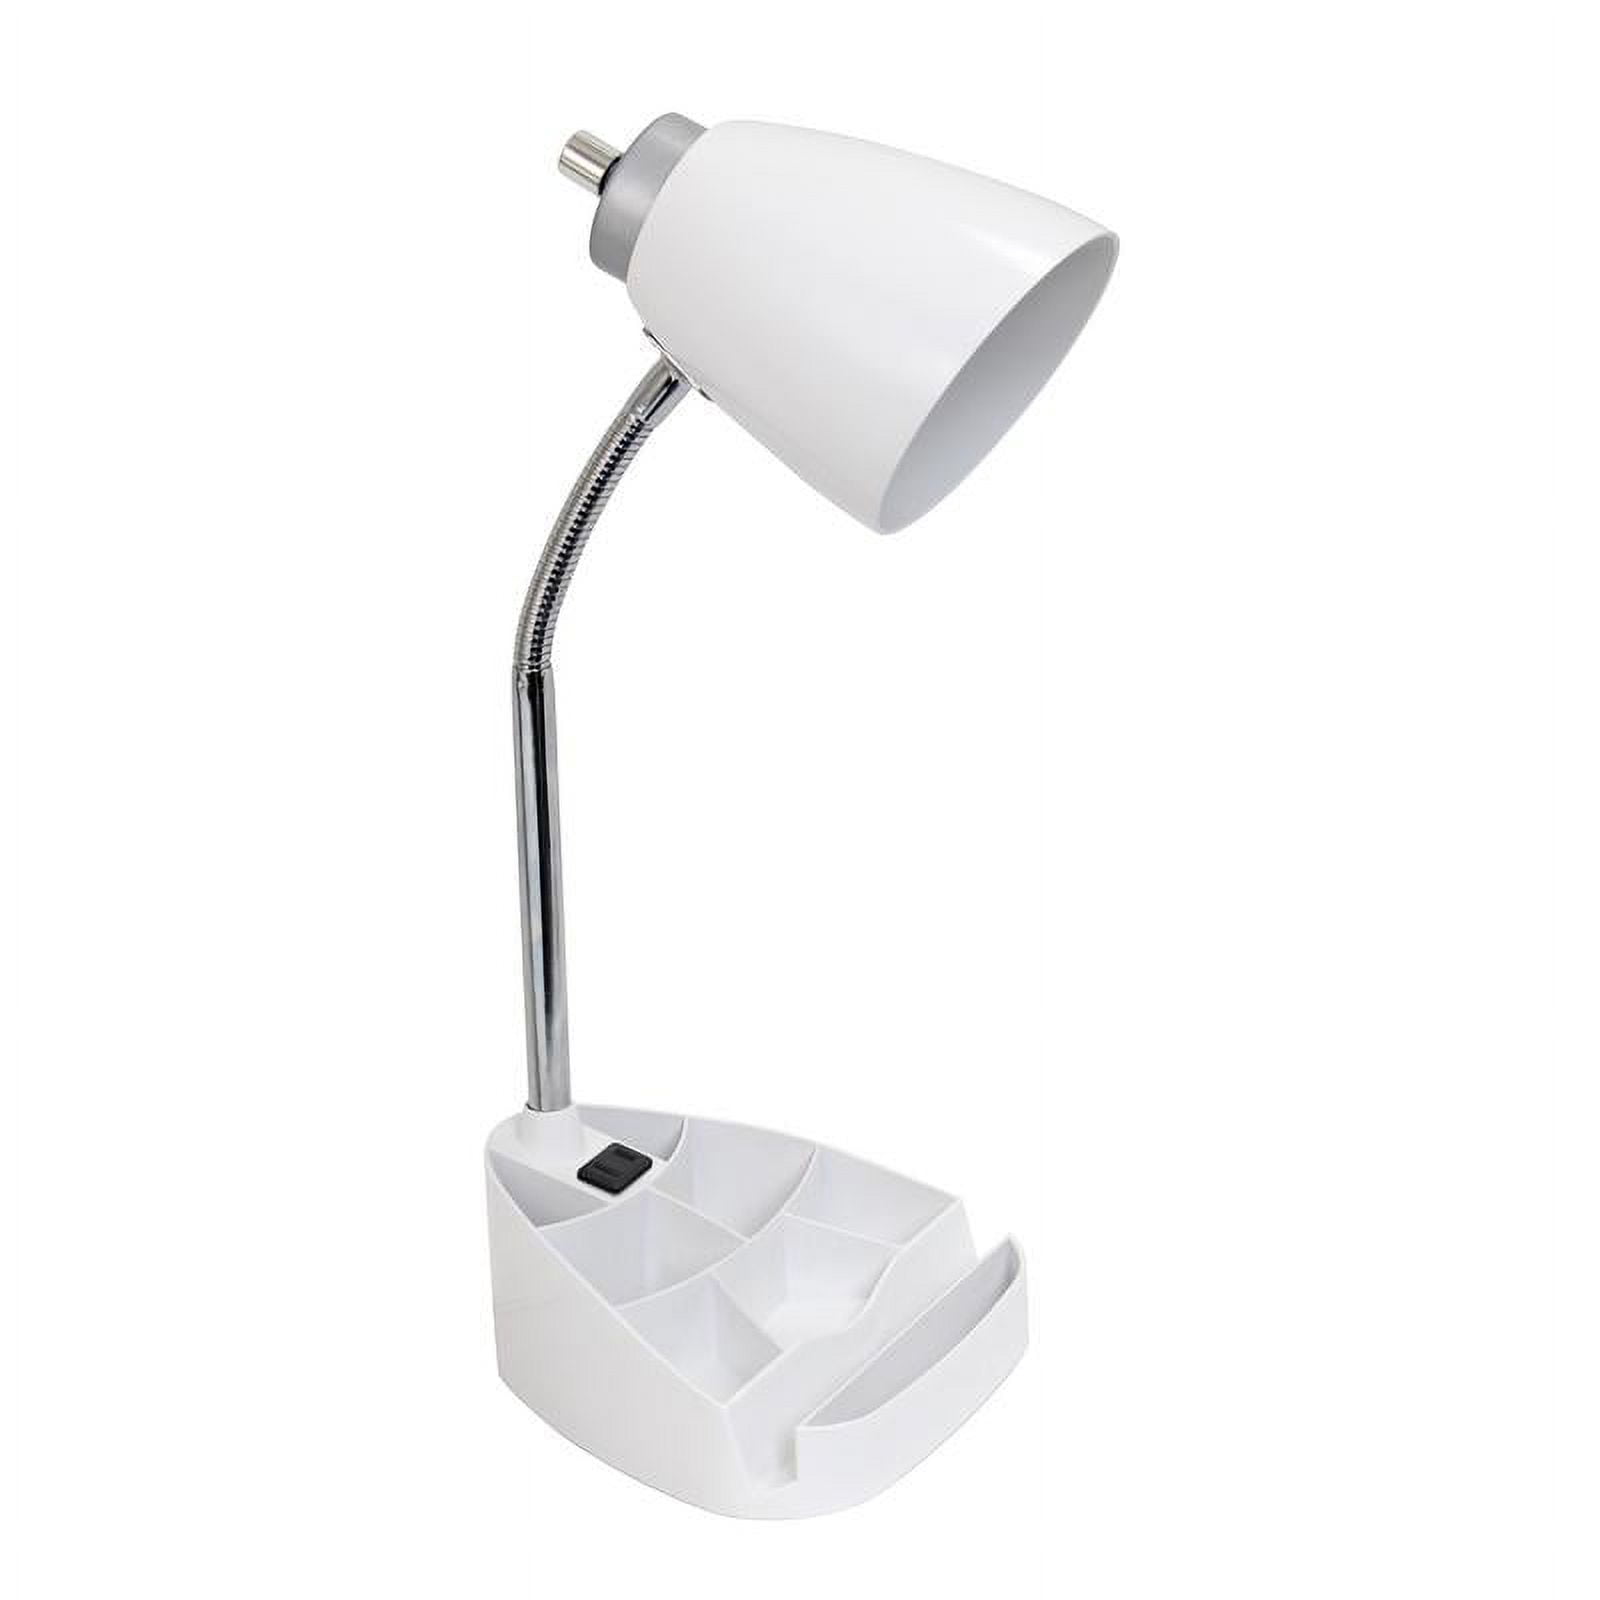 Ld1057-wht Gooseneck Organizer Desk Lamp With Ipad Tablet Stand Book Holder & Charging Outlet, White